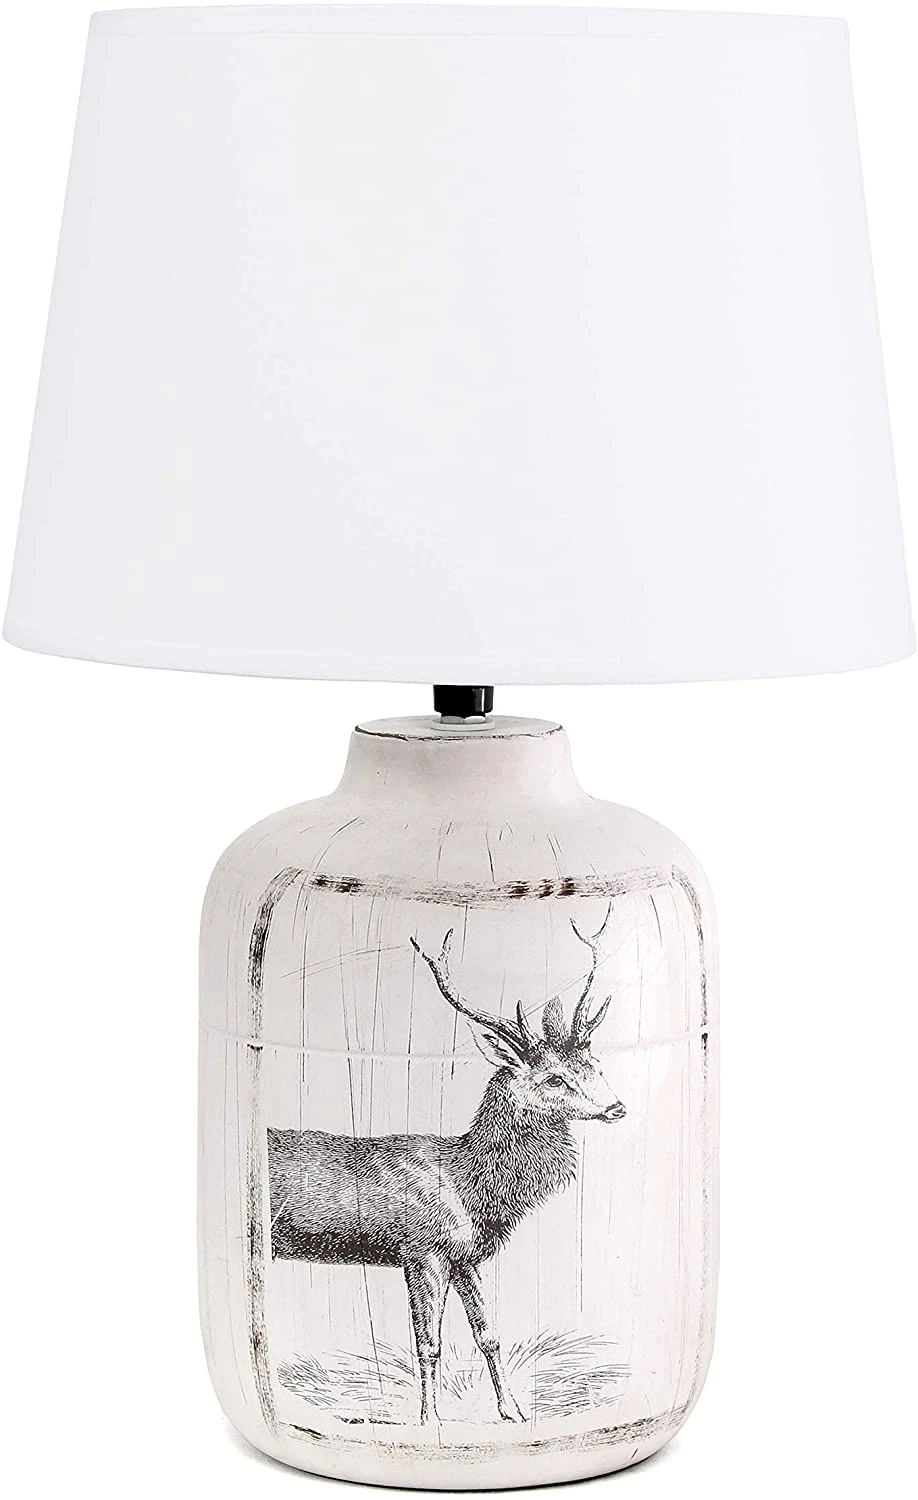 American style ceramic table lamp with design popular style